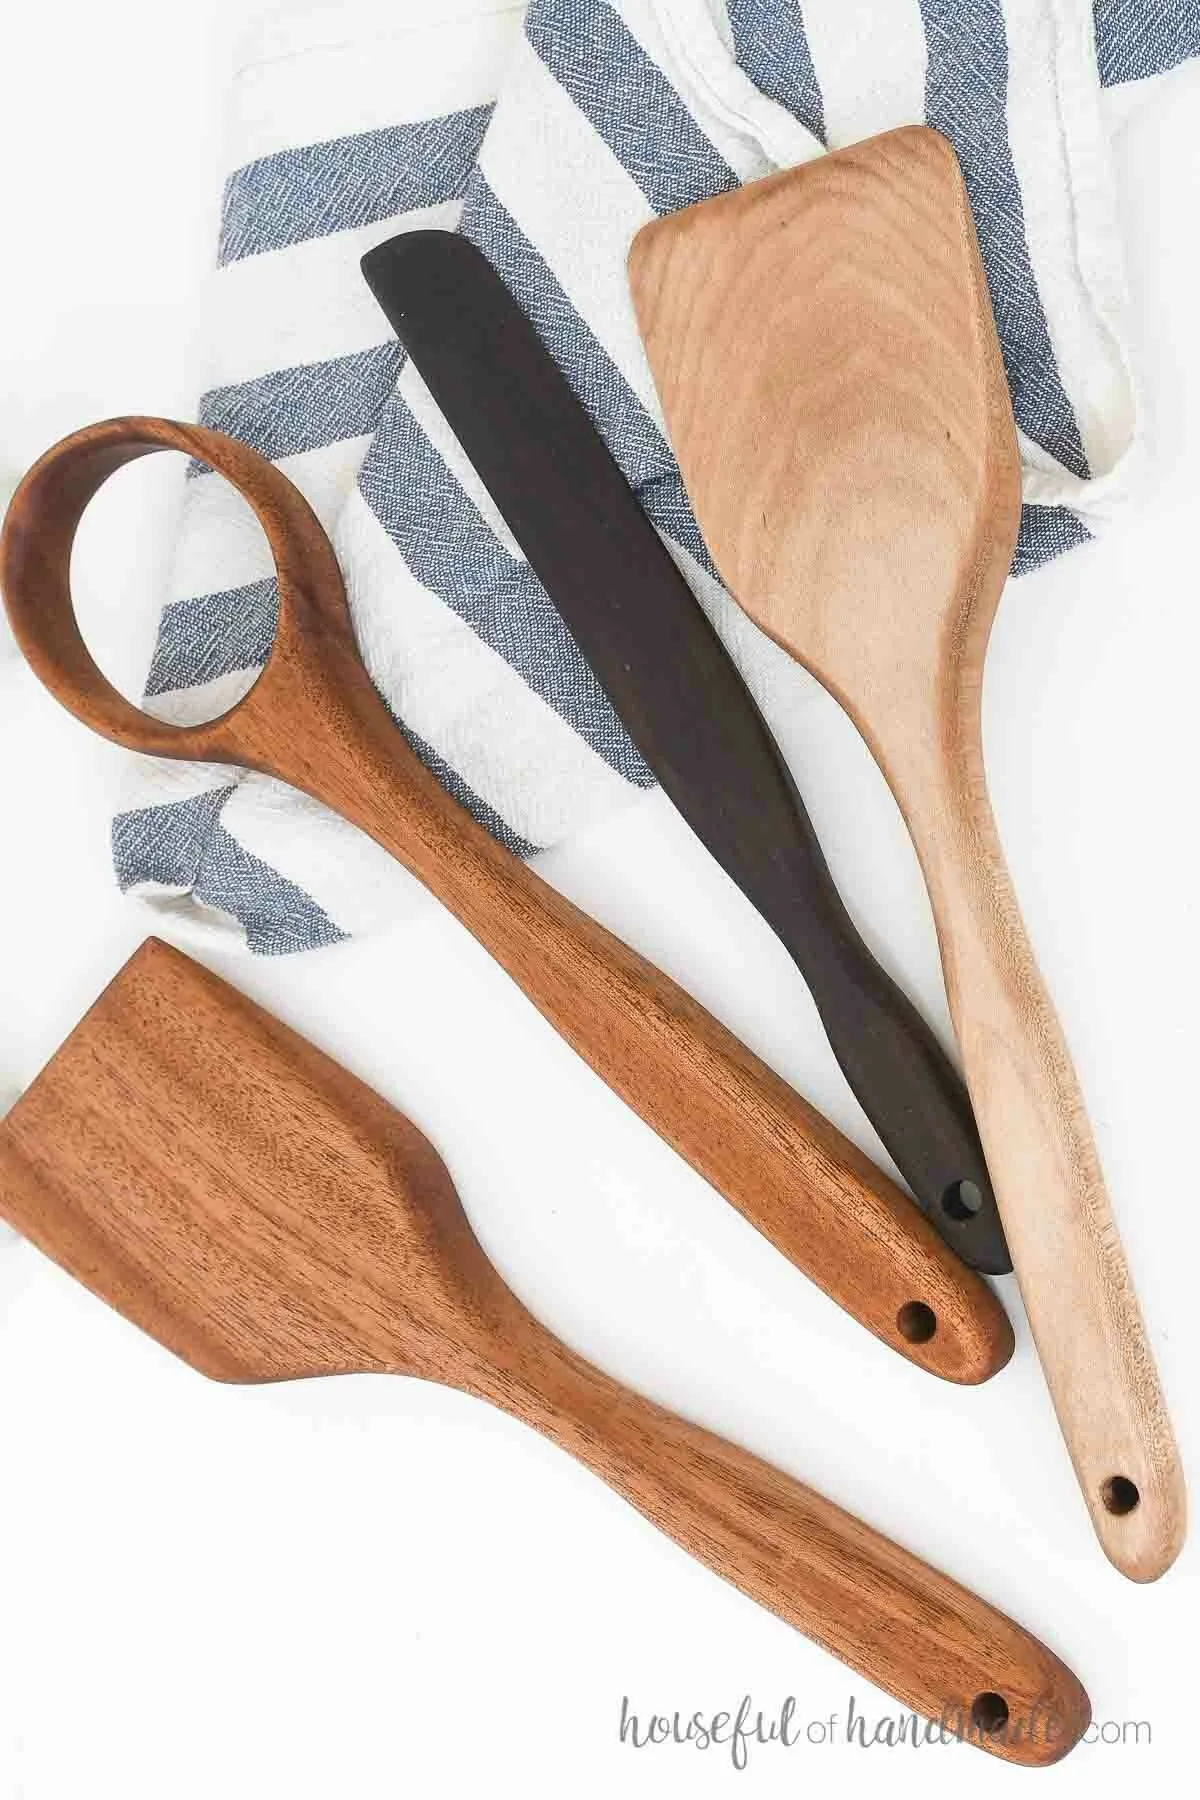 Two spatulas, a whisk, and a scraper made from scraps of hardwood.